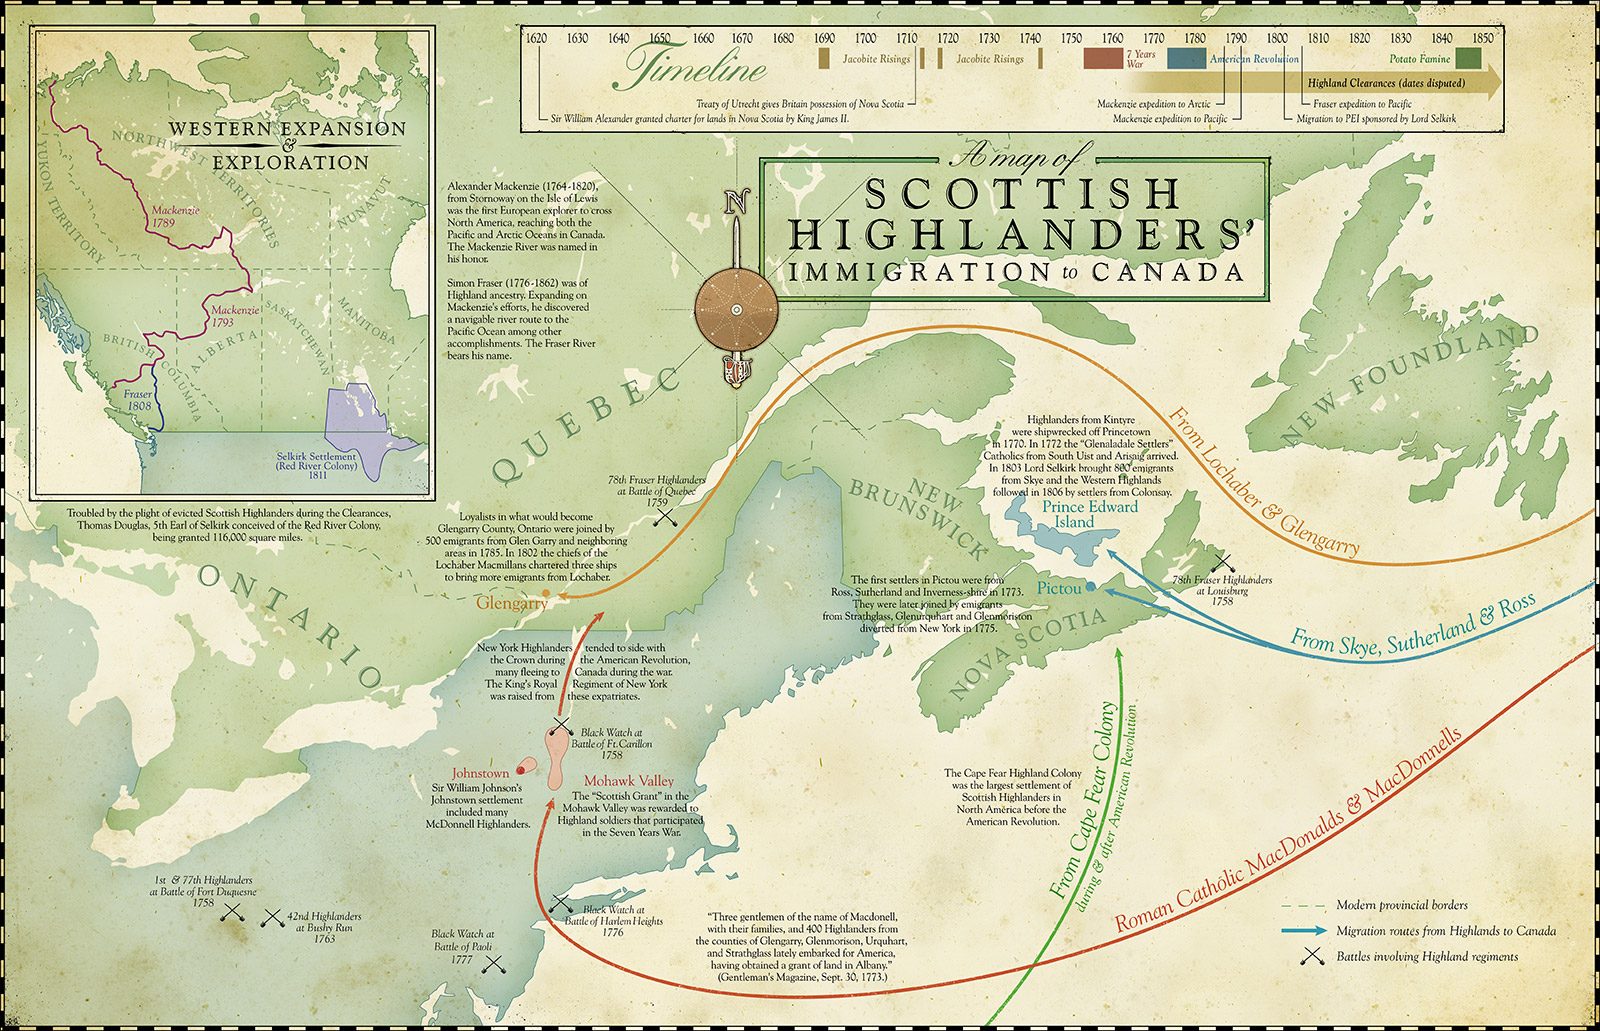 Map of Scottish Highlanders immigration to Canada